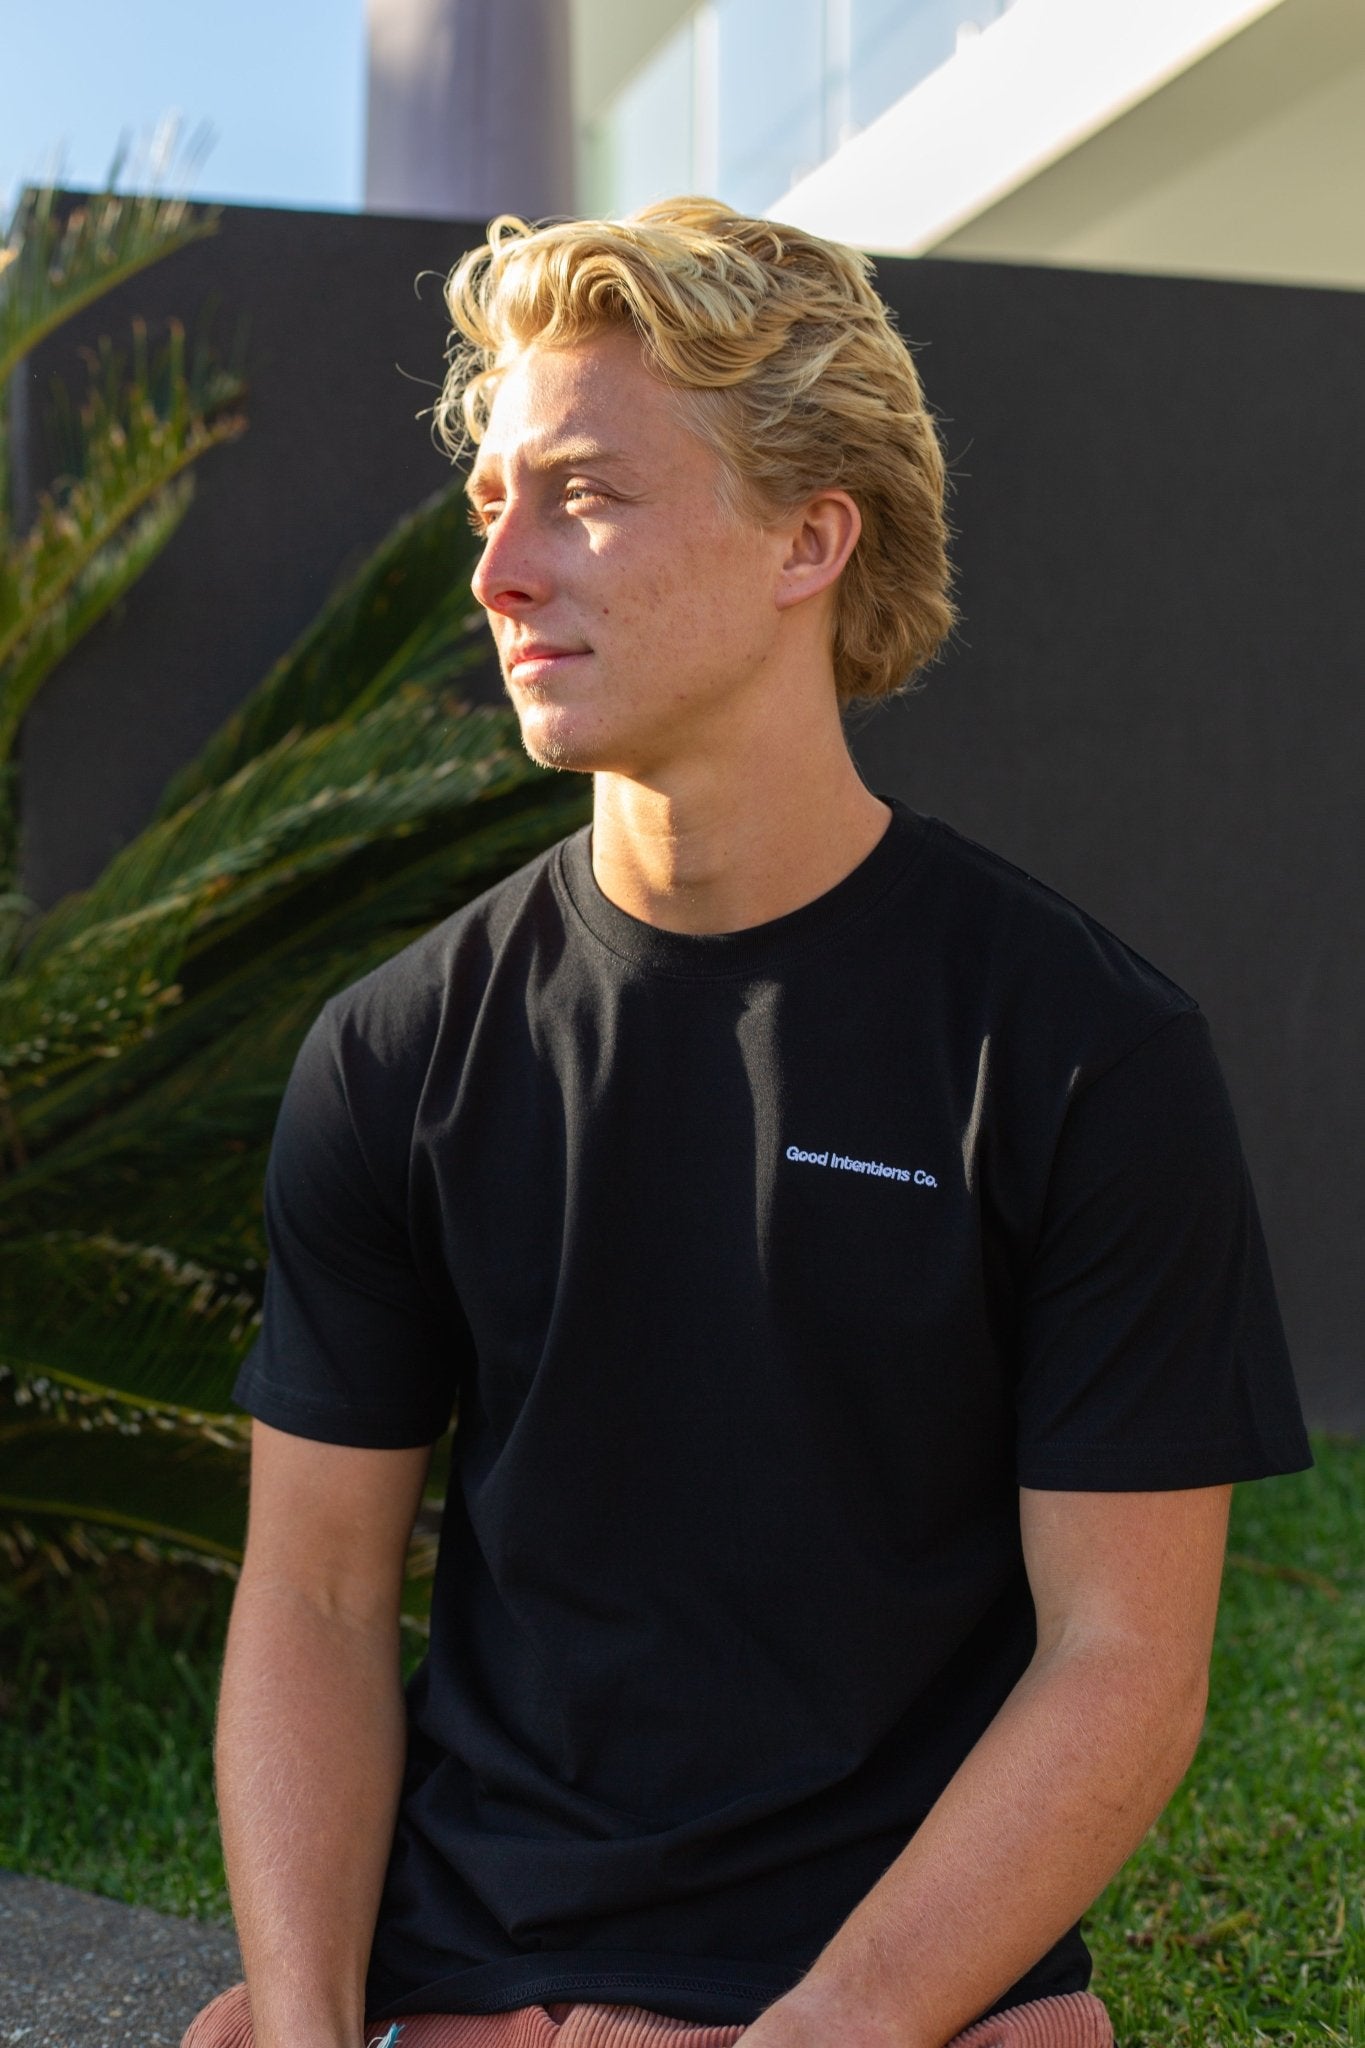 Man sitting on a wall wearing black t-shirt with white embroidered design on it 